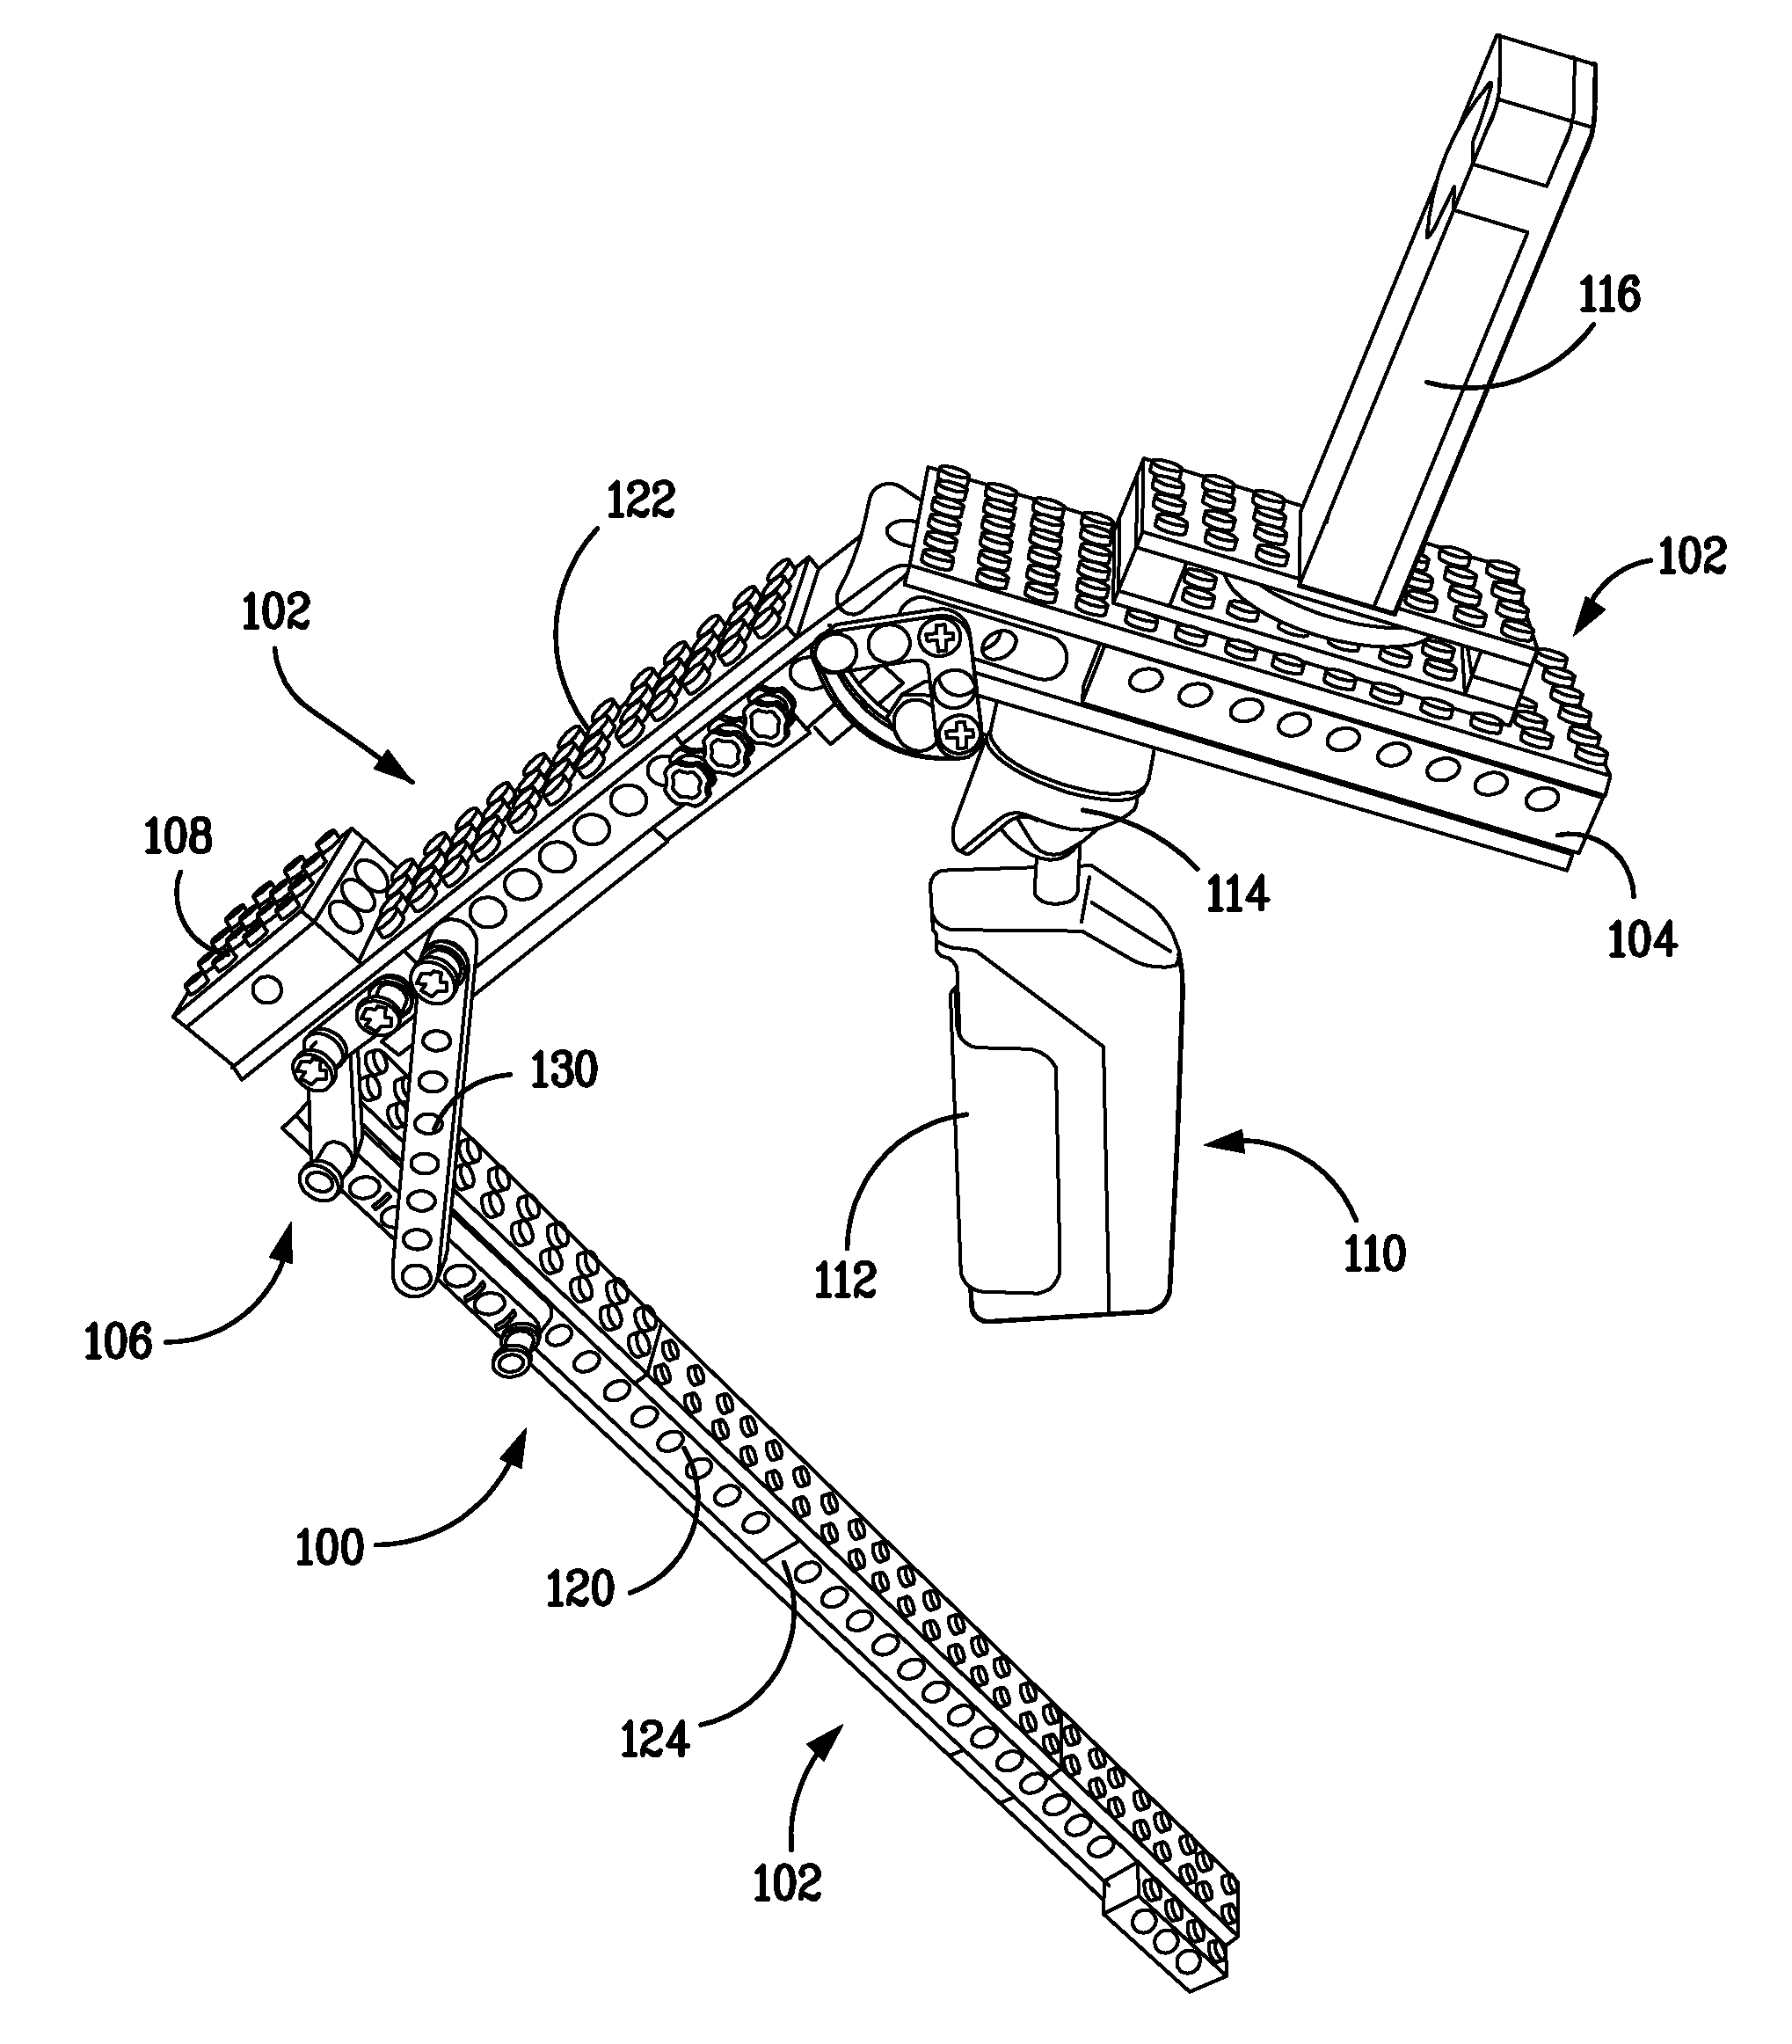 Modular and integrated equipment stabilizing support apparatuses